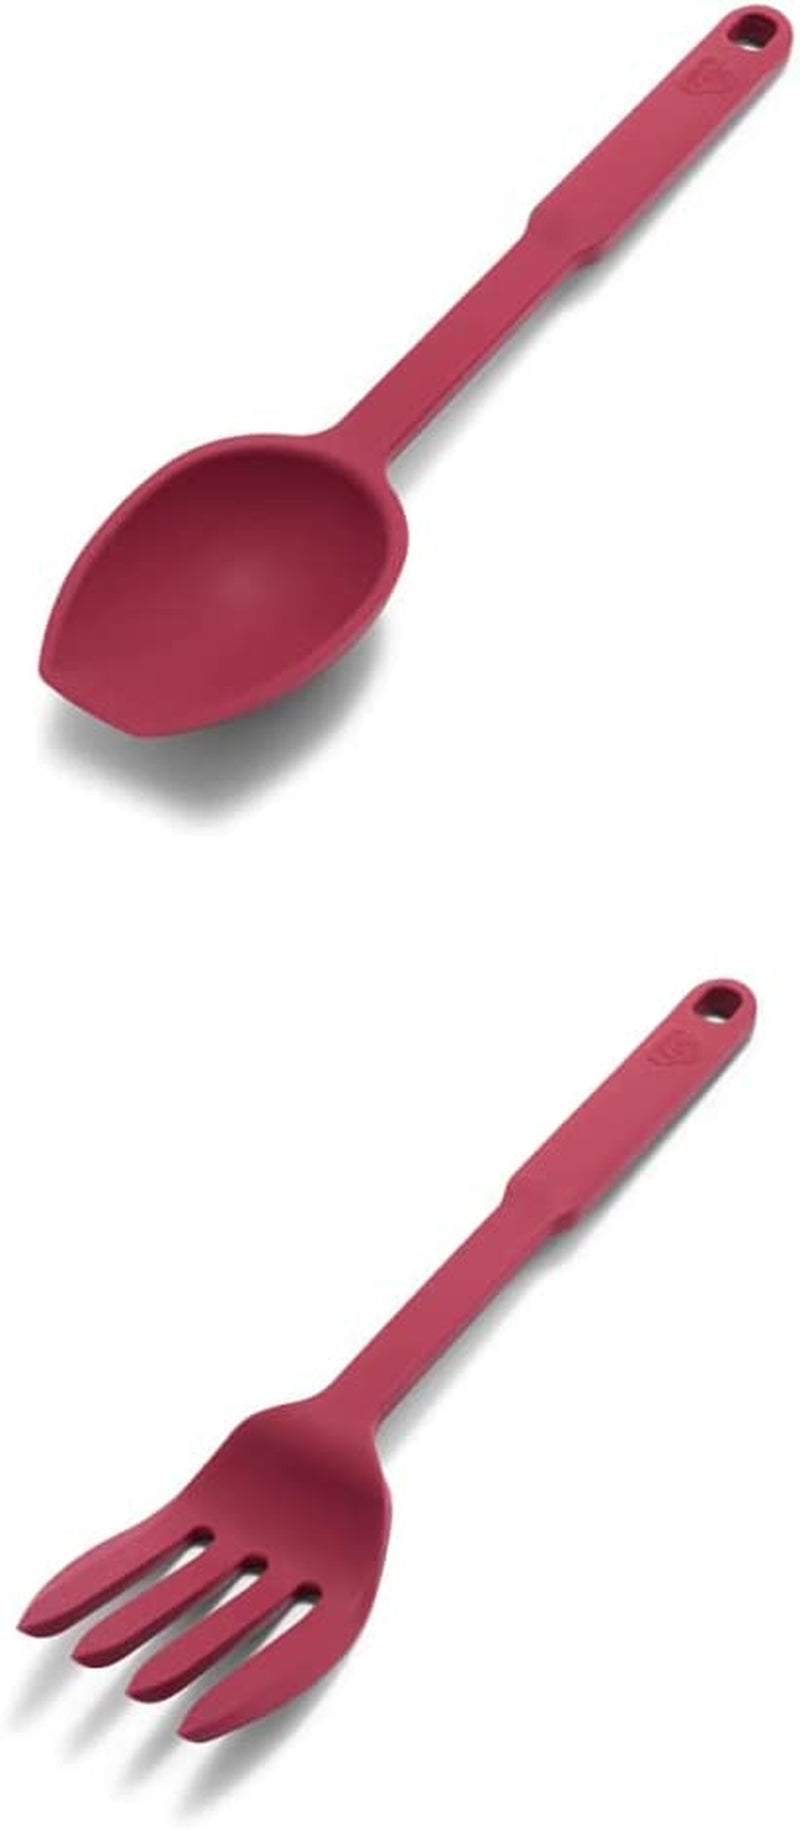 Greenlife Cooking Tools and Utensils, Silicone Spoon for Scooping Scraping and Mixing, Heat and Stain Resistant, Dishwasher Safe, Red Home & Garden > Kitchen & Dining > Kitchen Tools & Utensils GreenLife Red Fork and Spoon Set 